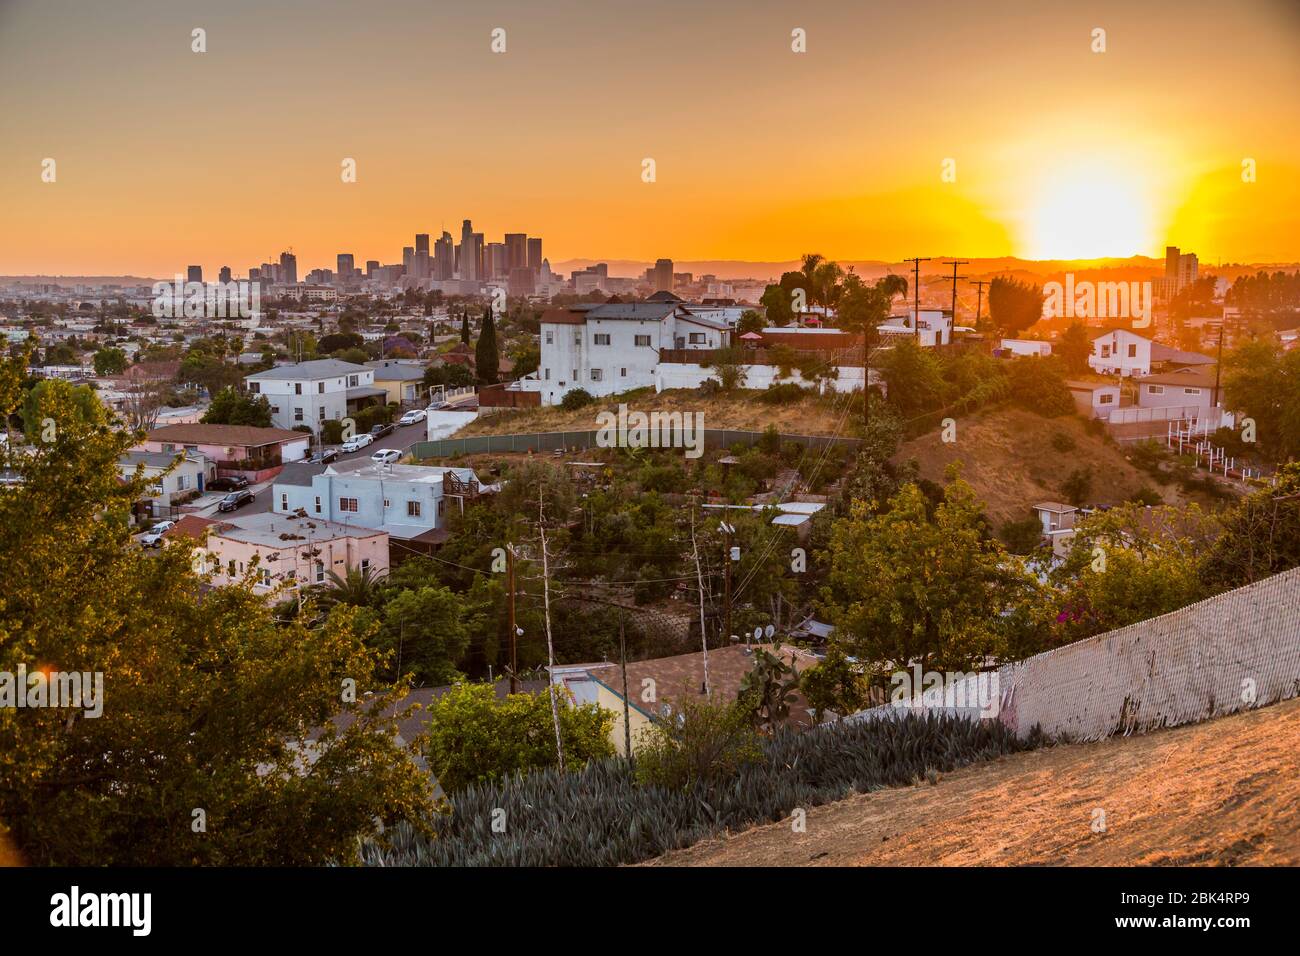 View of Downtown LA from suburbs at sunset, Los Angeles, California, United States of America, North America Stock Photo